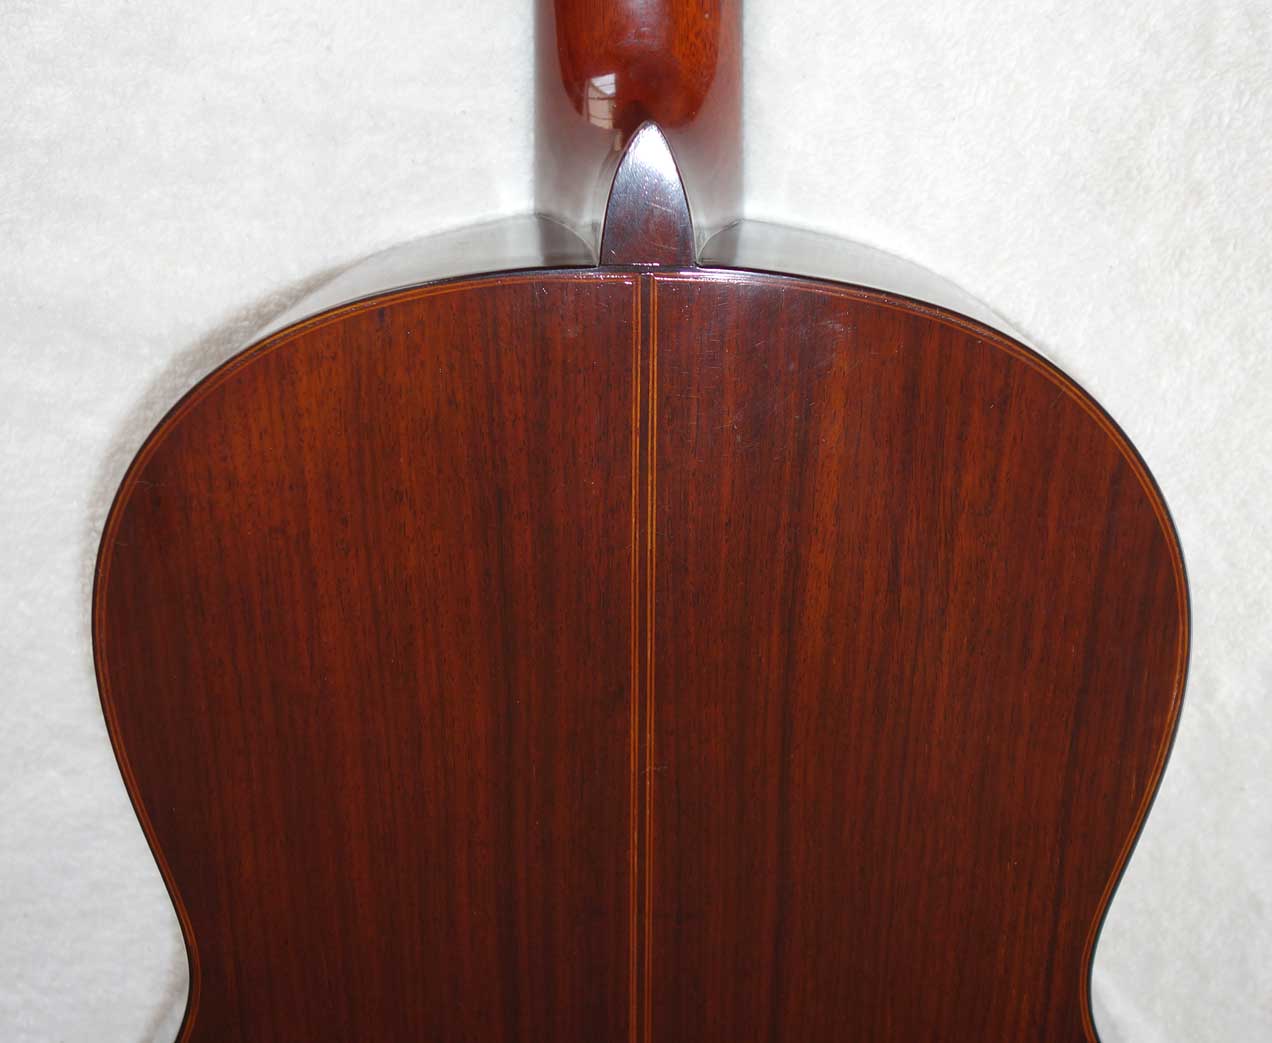 1995 Lucio Nuñez "Balbina" Classical Guitar w/Case, German Spruce top / Indian Rosewood Back & Sides, French Polish, 